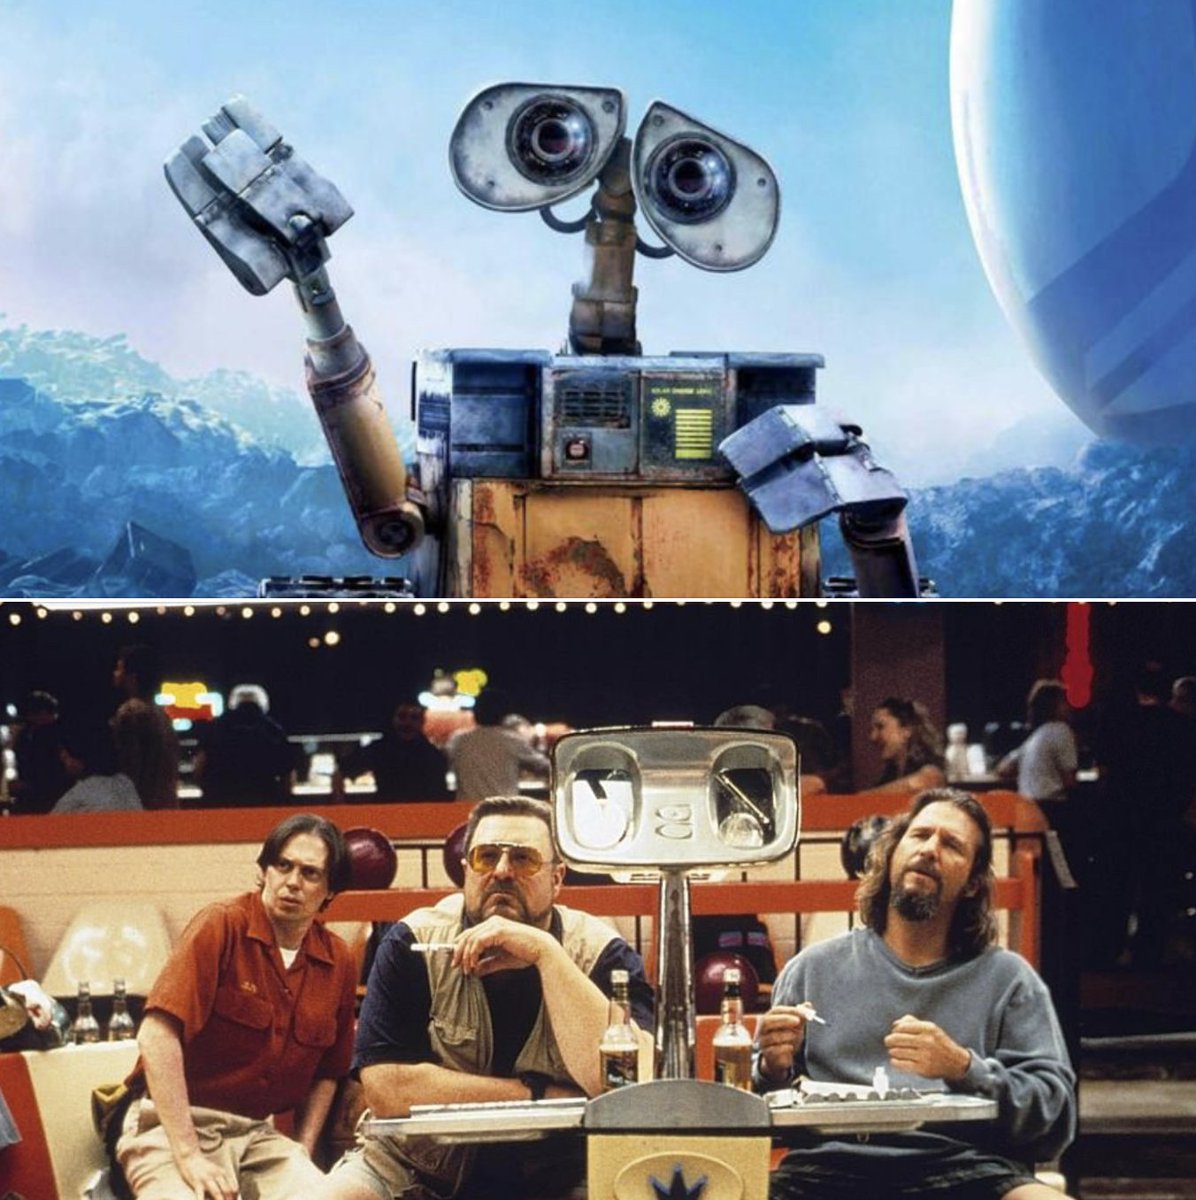 Wall-E (2008) looks like the bowling table in The Big Lebowski (1998). Intentional or coincidental?